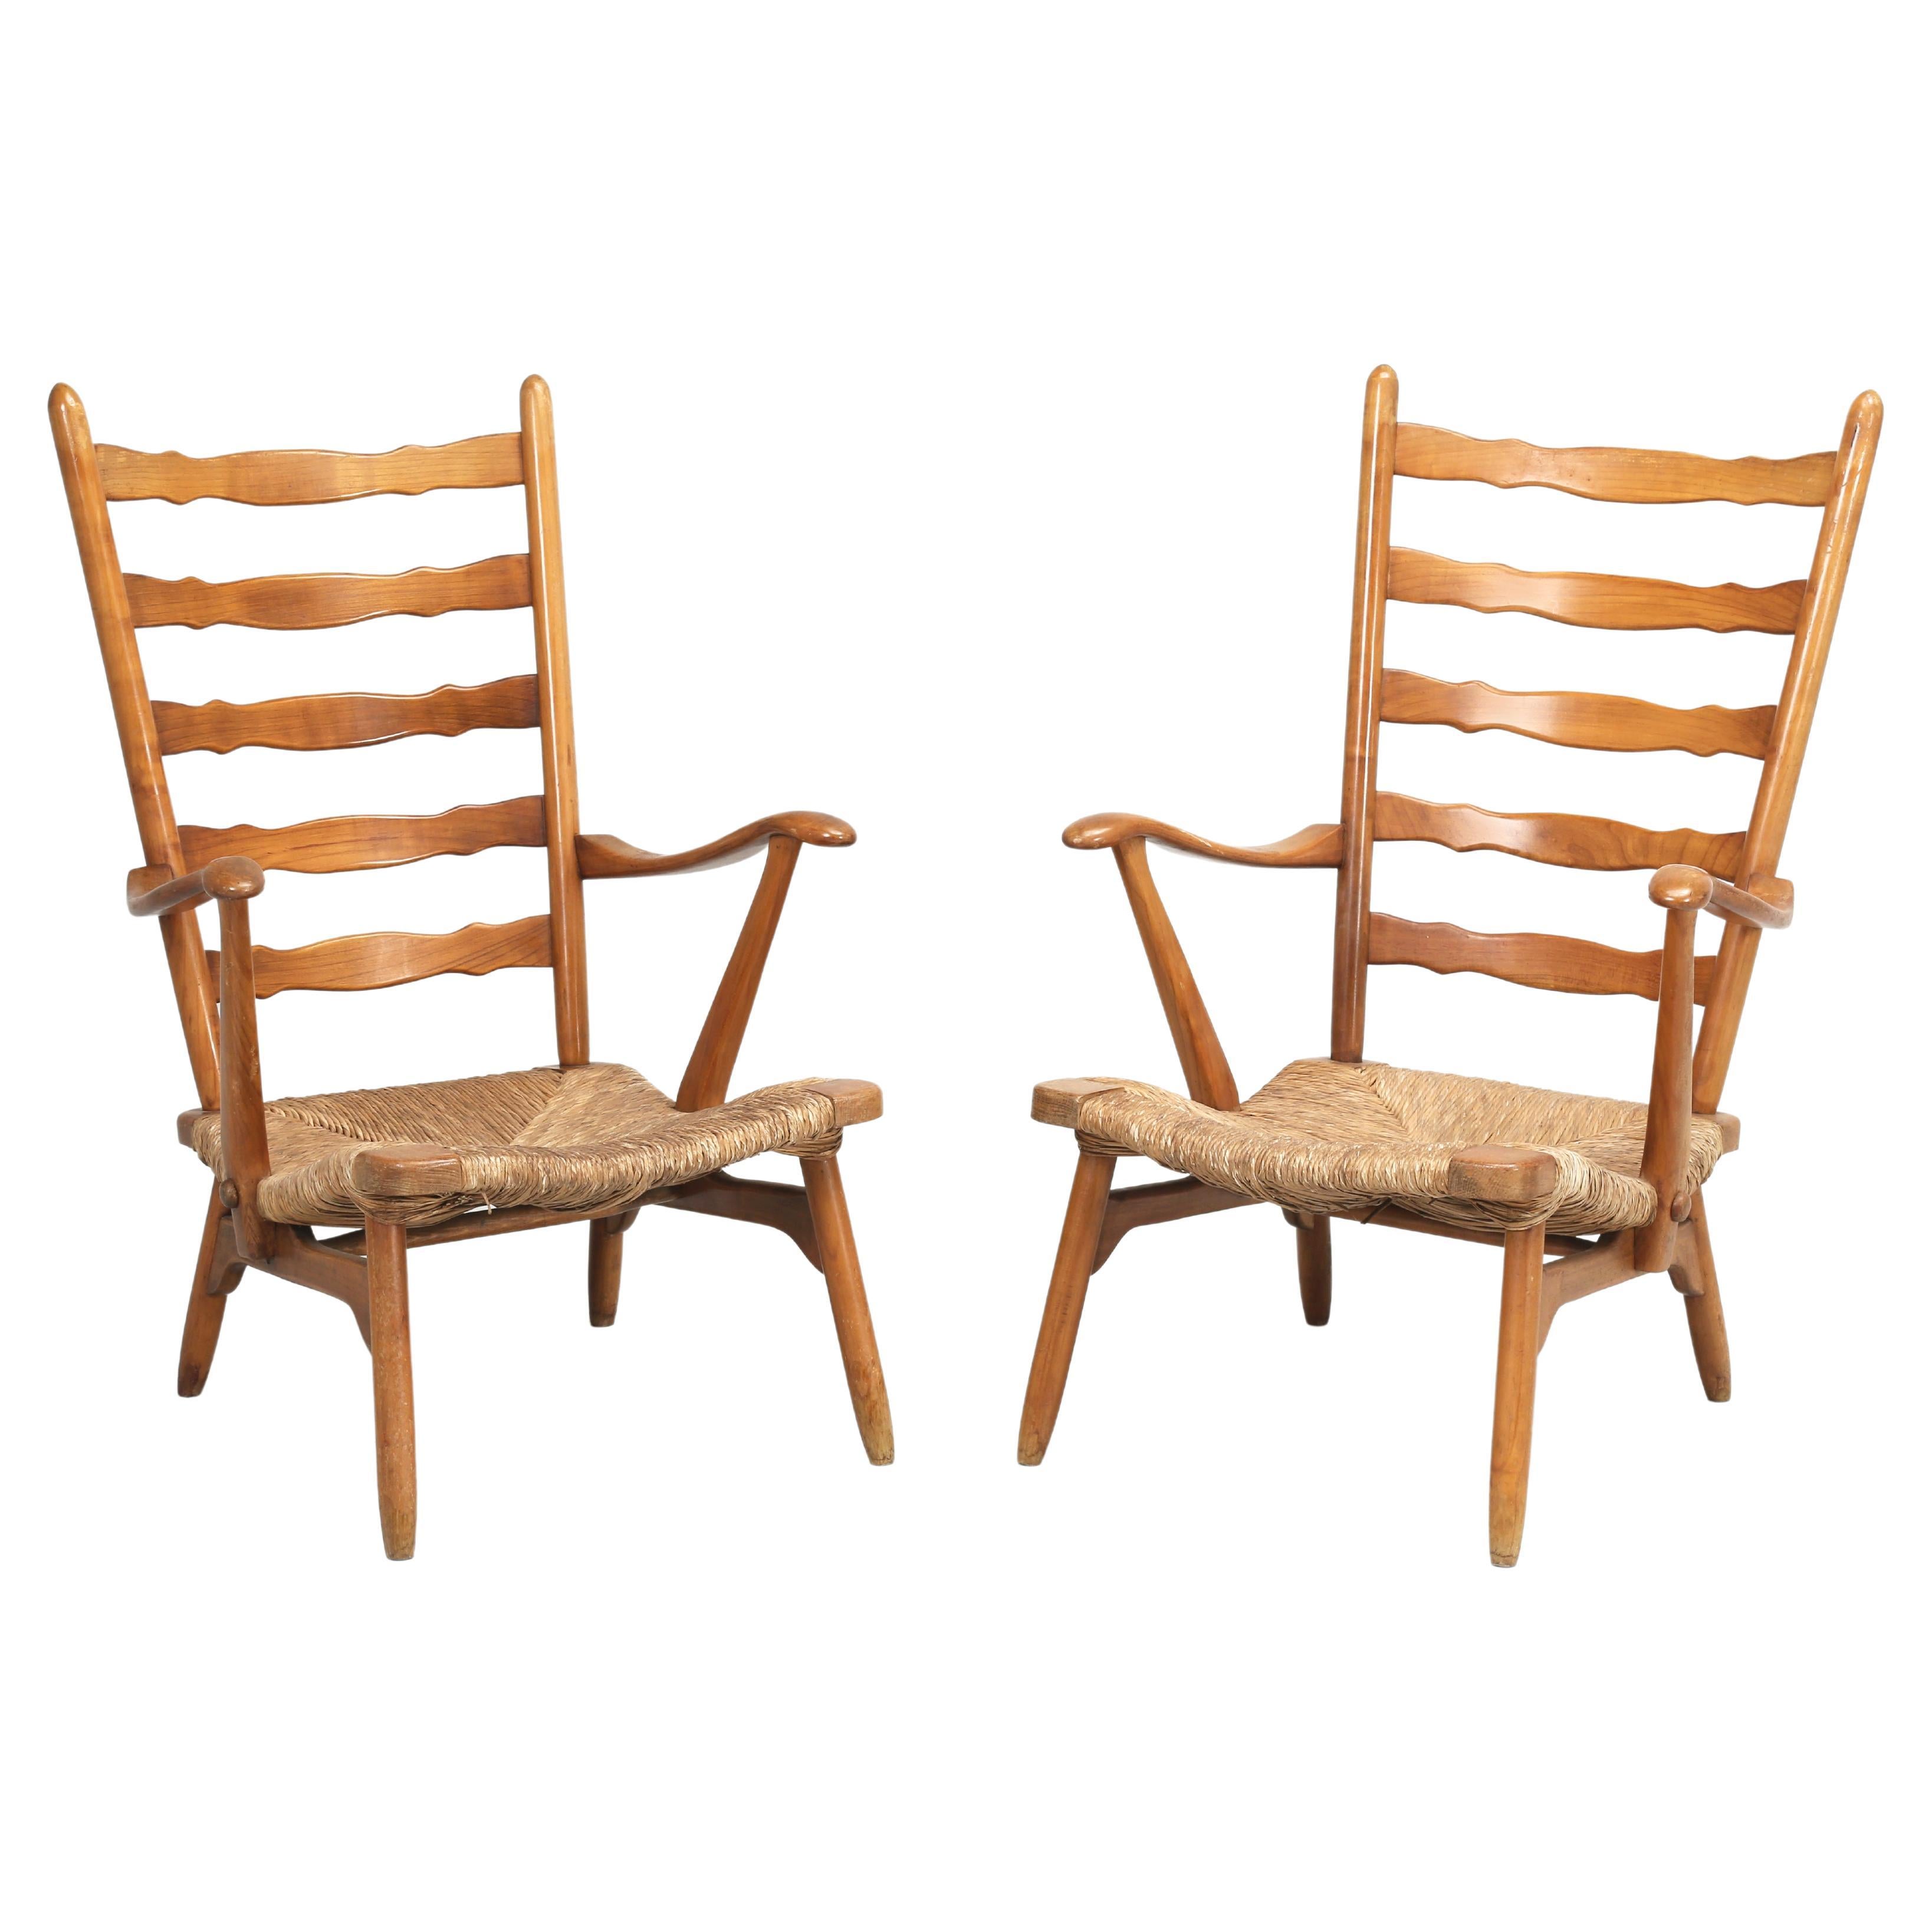 Scandinavian Mid-Century Modern Pair of Chairs Unrestored Condition, circa 1960s For Sale